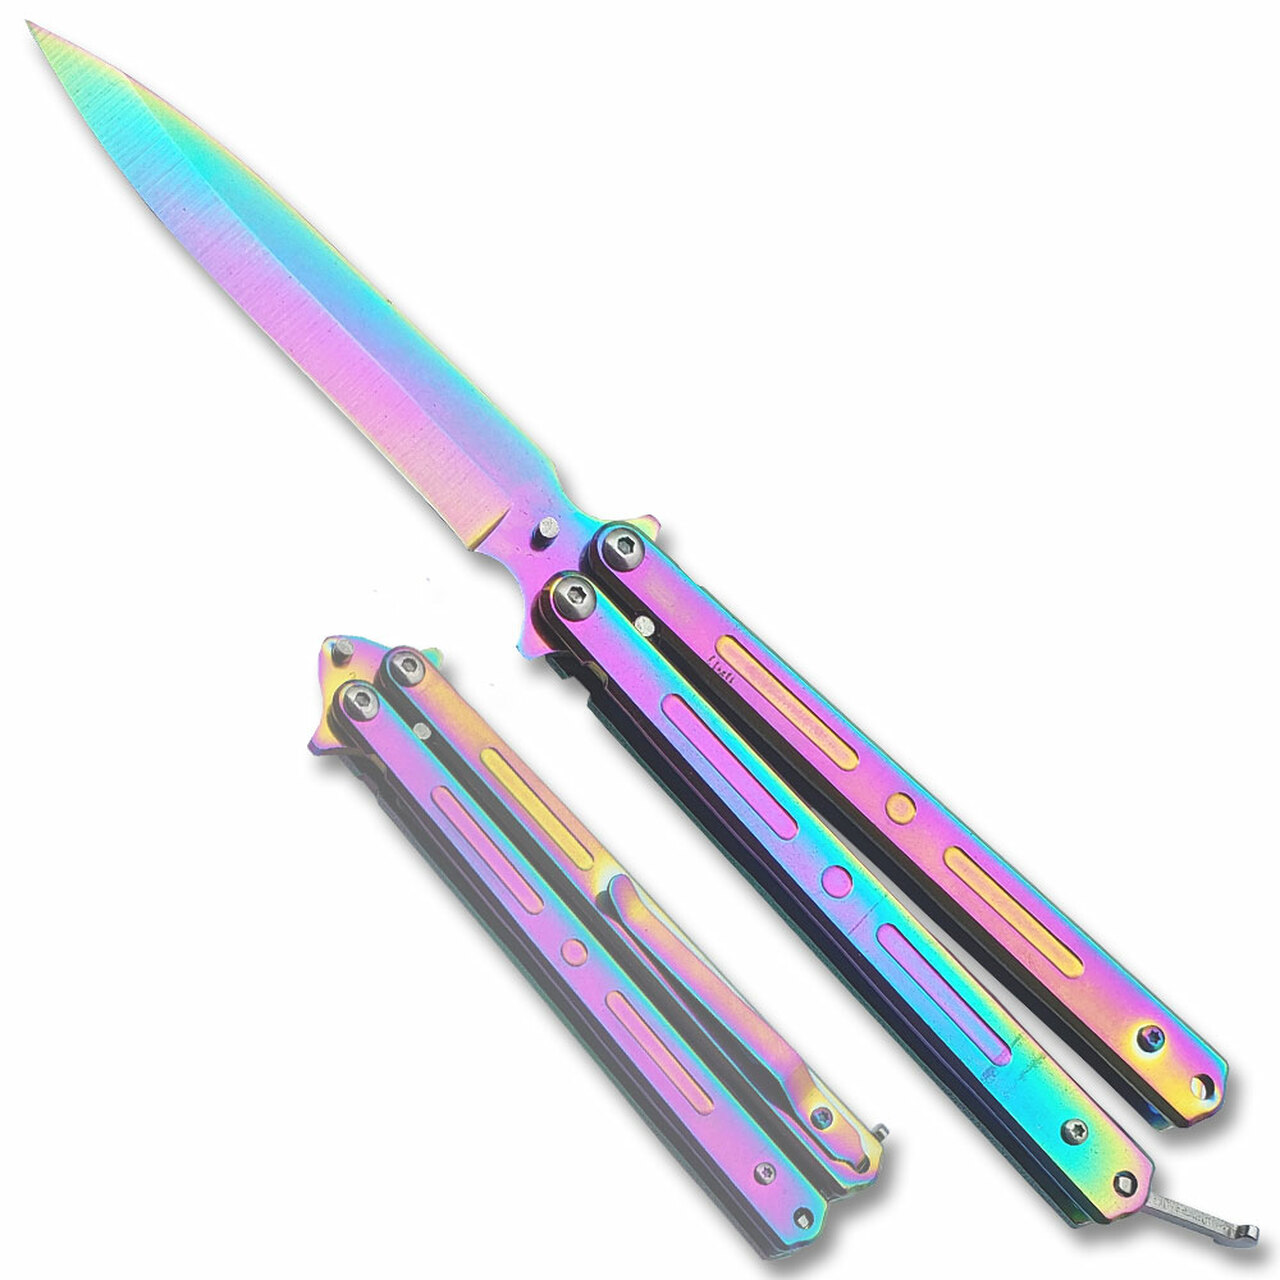 THIRD BUTTERFLY KNIFE RAINBOW PATTERN BLADE 11CM - Wicked Store